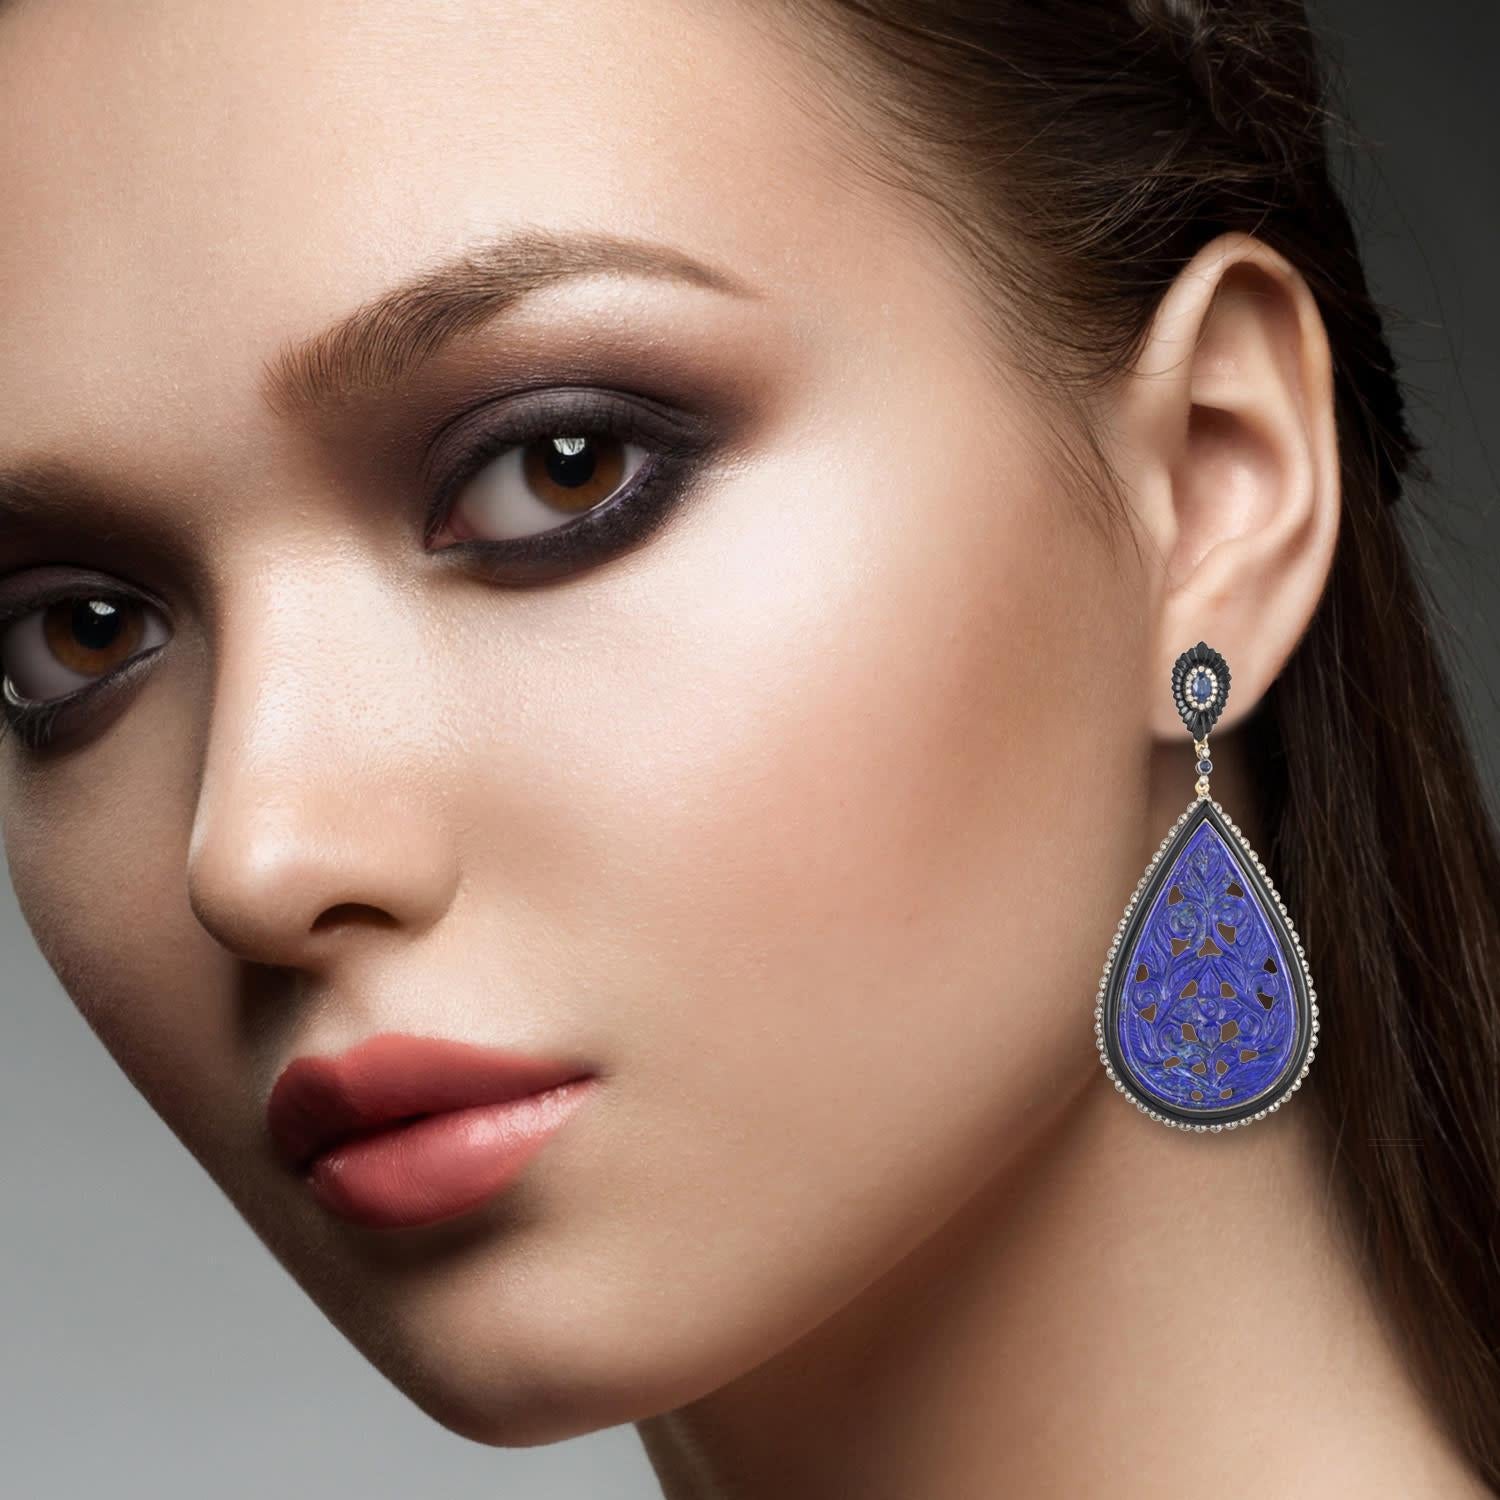 Cast in 18-karat gold & sterling silver, these beautiful drop earrings are set with 62.24 carats lapis, 16.63 carats black onyx, .68 carats blue sapphire and 1.14 carats of sparkling diamonds. 

FOLLOW  MEGHNA JEWELS storefront to view the latest